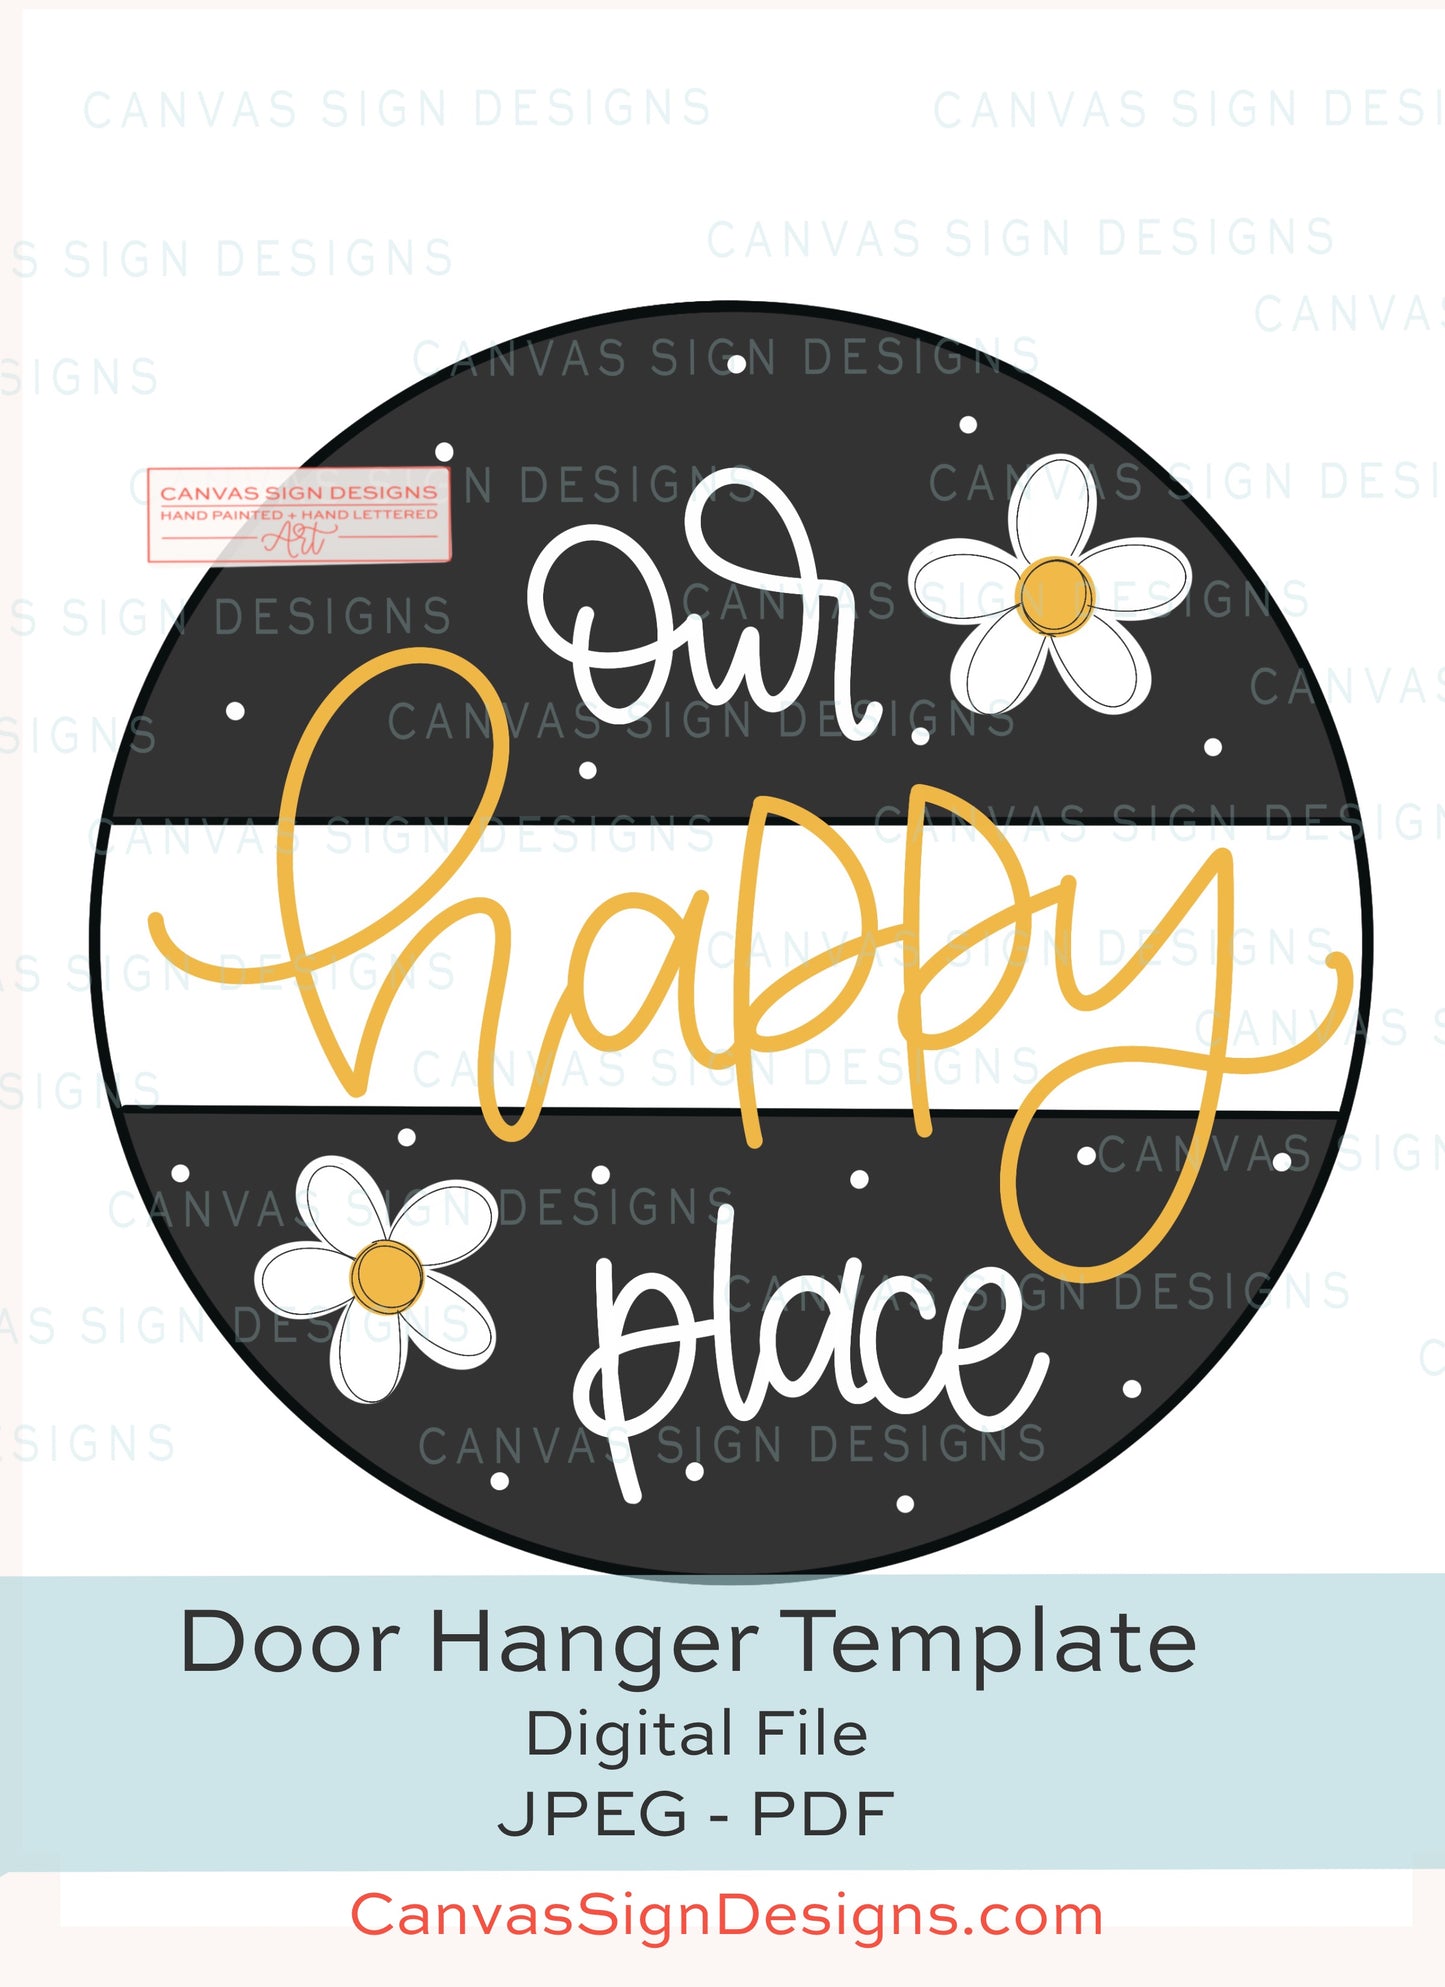 Our Happy Place Daisy Door Hanger Template